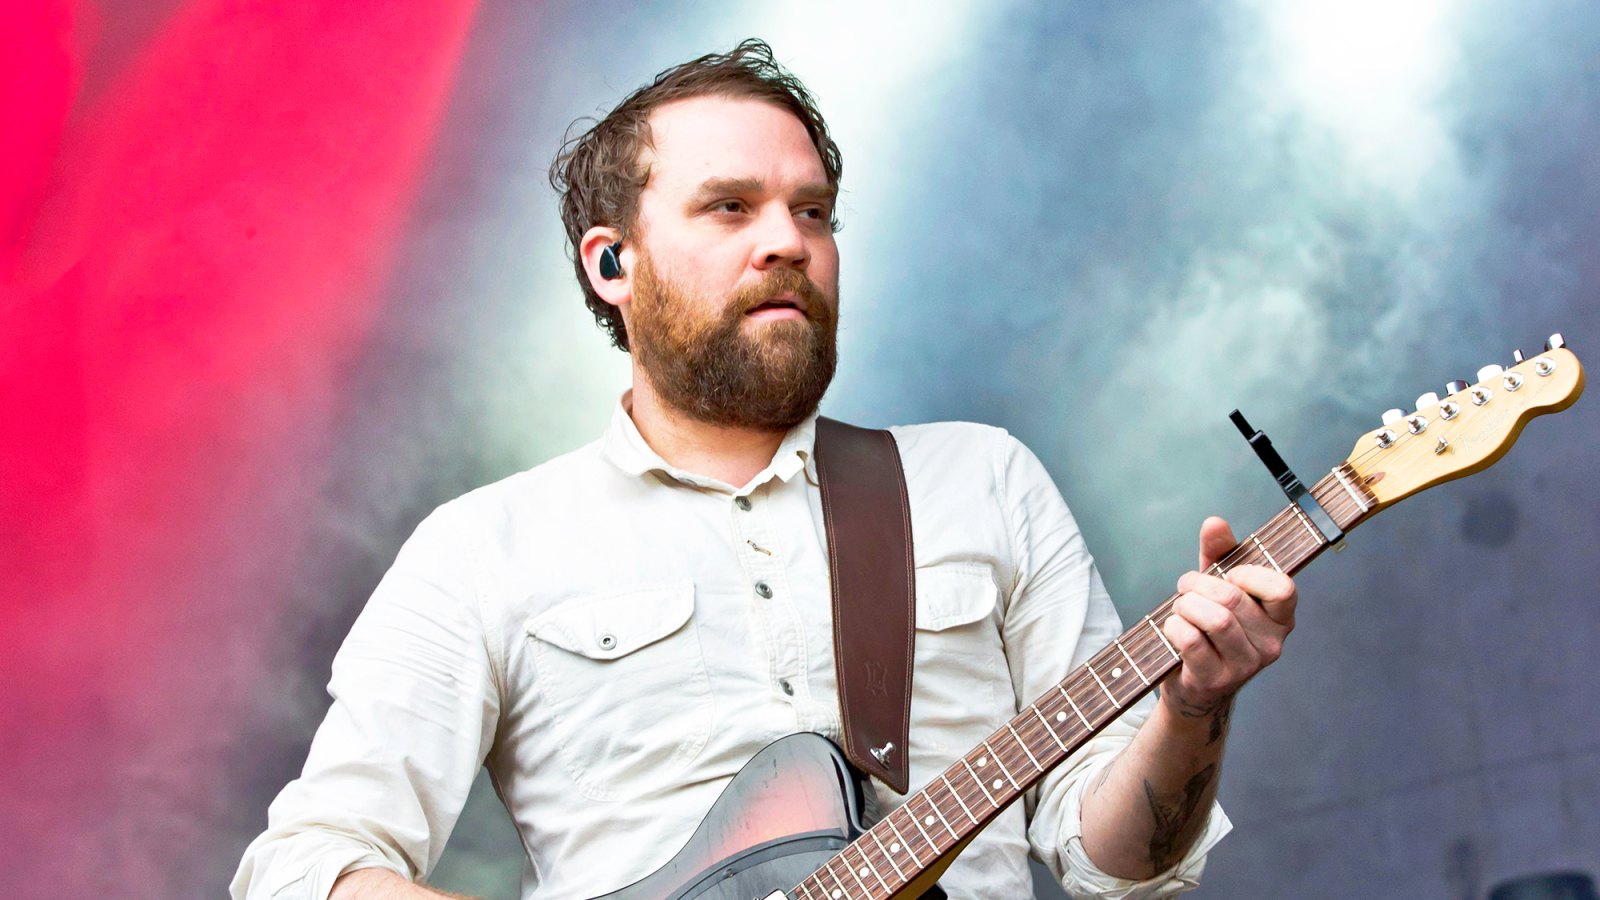 Scott Hutchison of Frightened Rabbit performs live during a concert at the Zitadelle Spandau in Berlin, Germany.